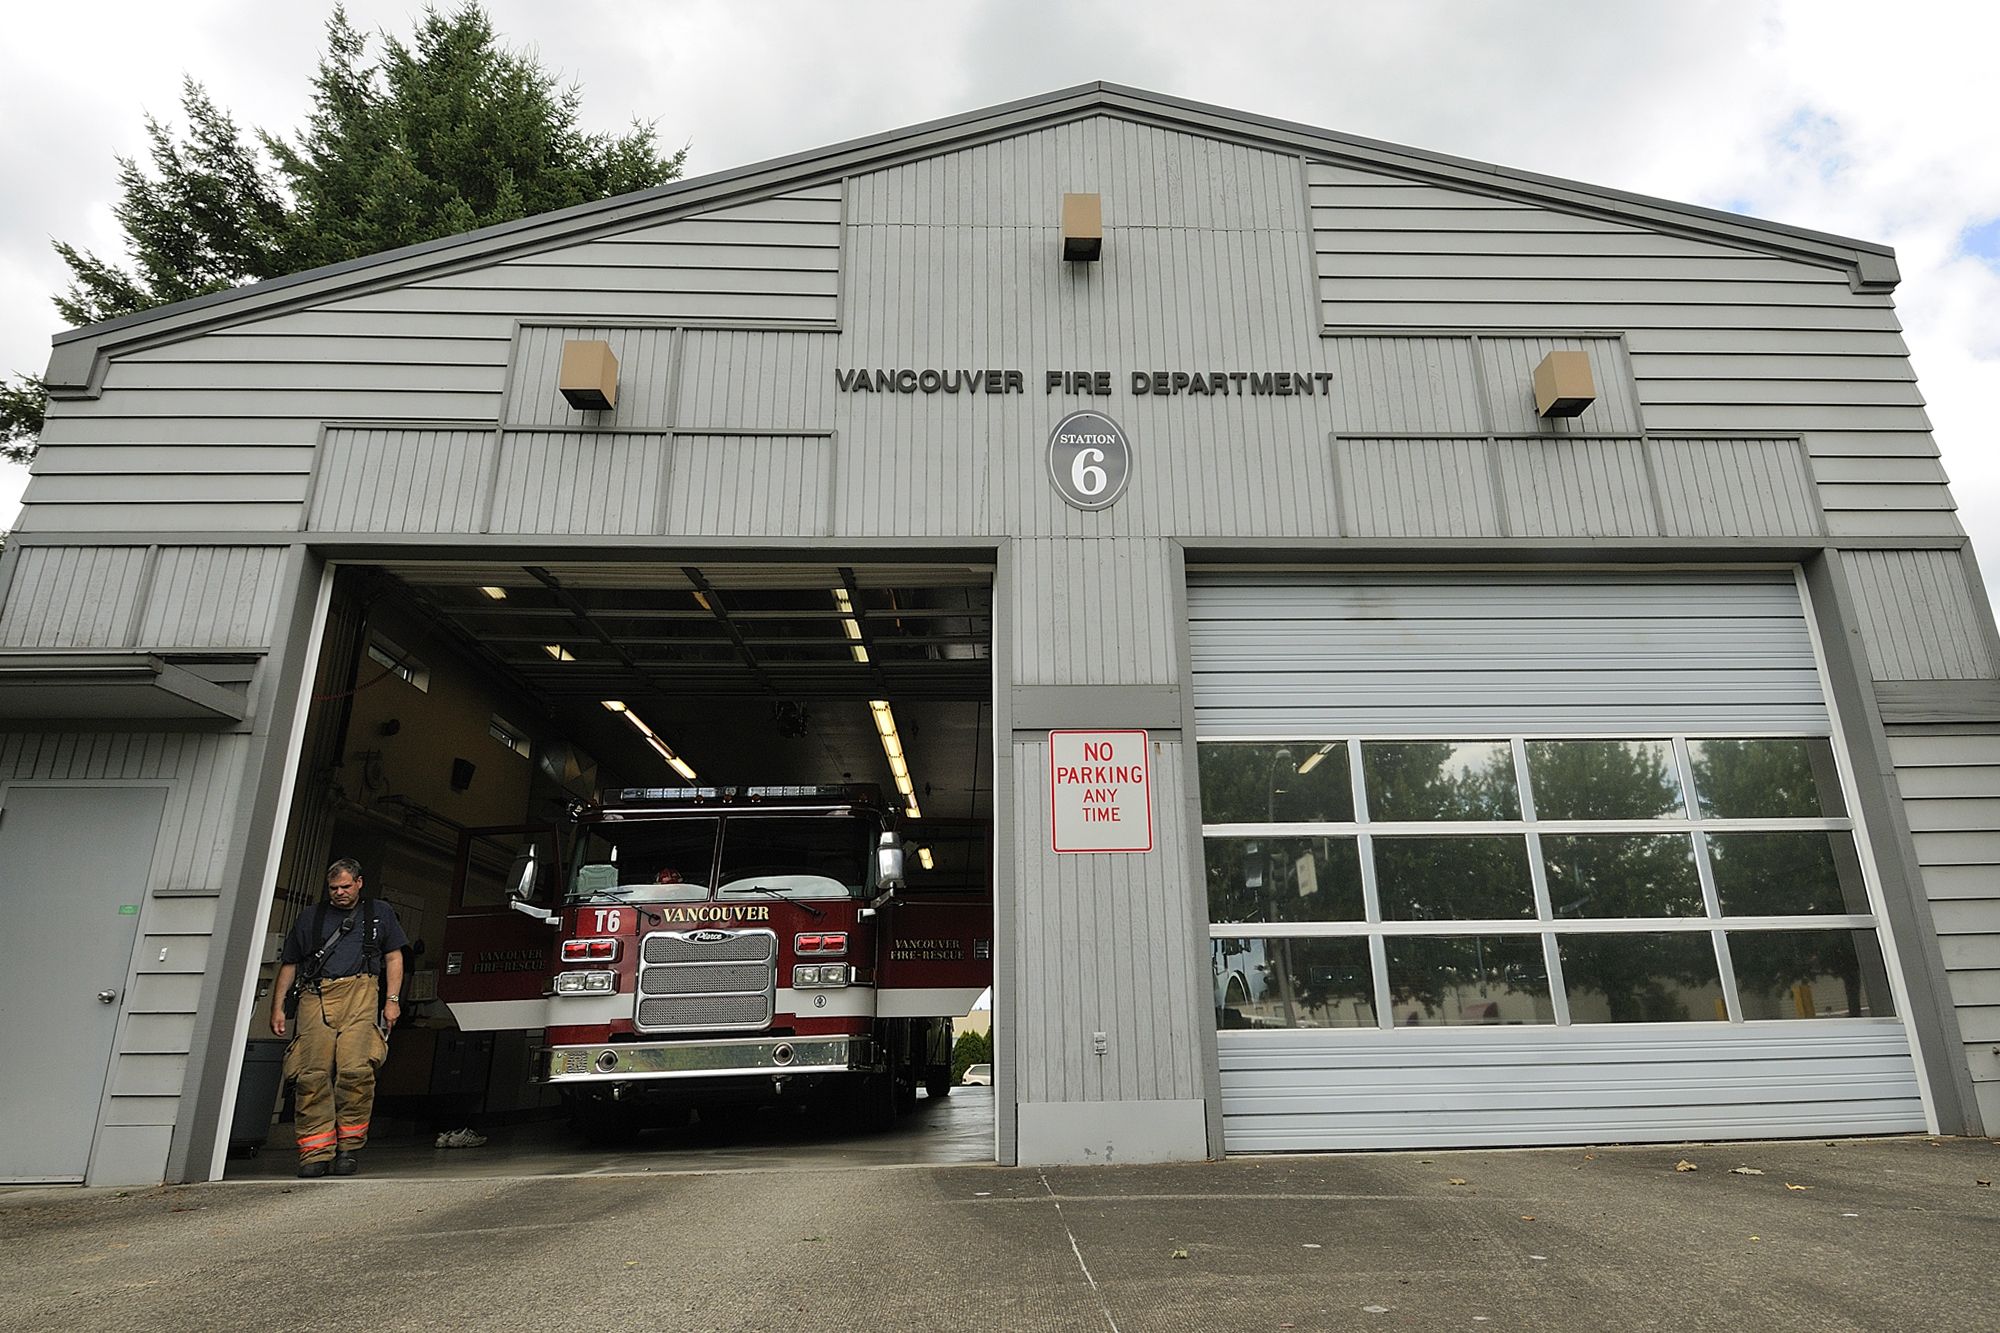 Vancouver's Fire Station 6, which was closed for most of 2011 for budget reasons, is facing another possible closure.